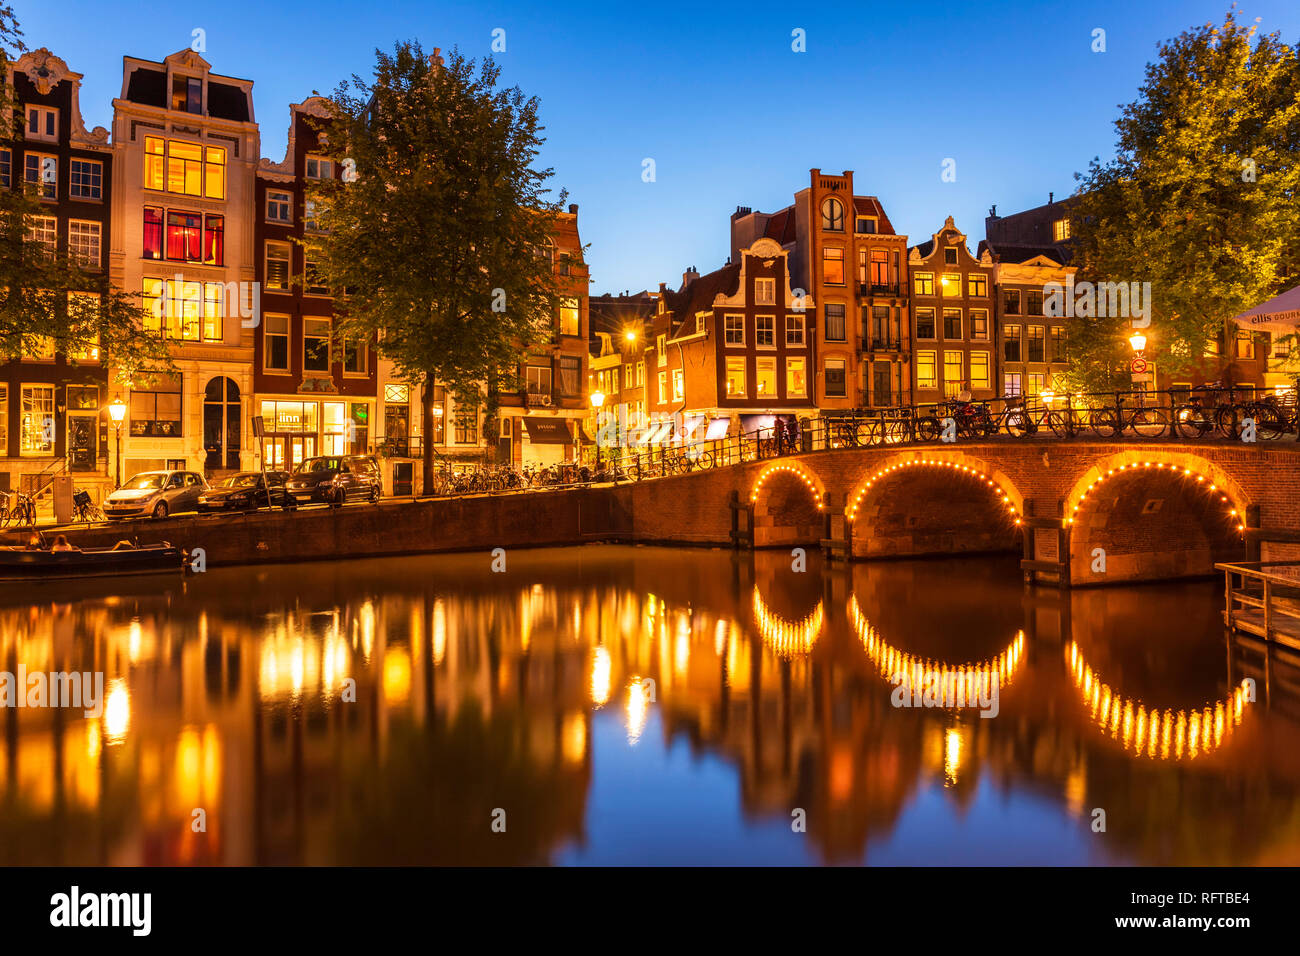 Illuminated canal bridge with reflections at night over the Singel Torensluis canal, Amsterdam, North Holland, Netherlands, Europe Stock Photo